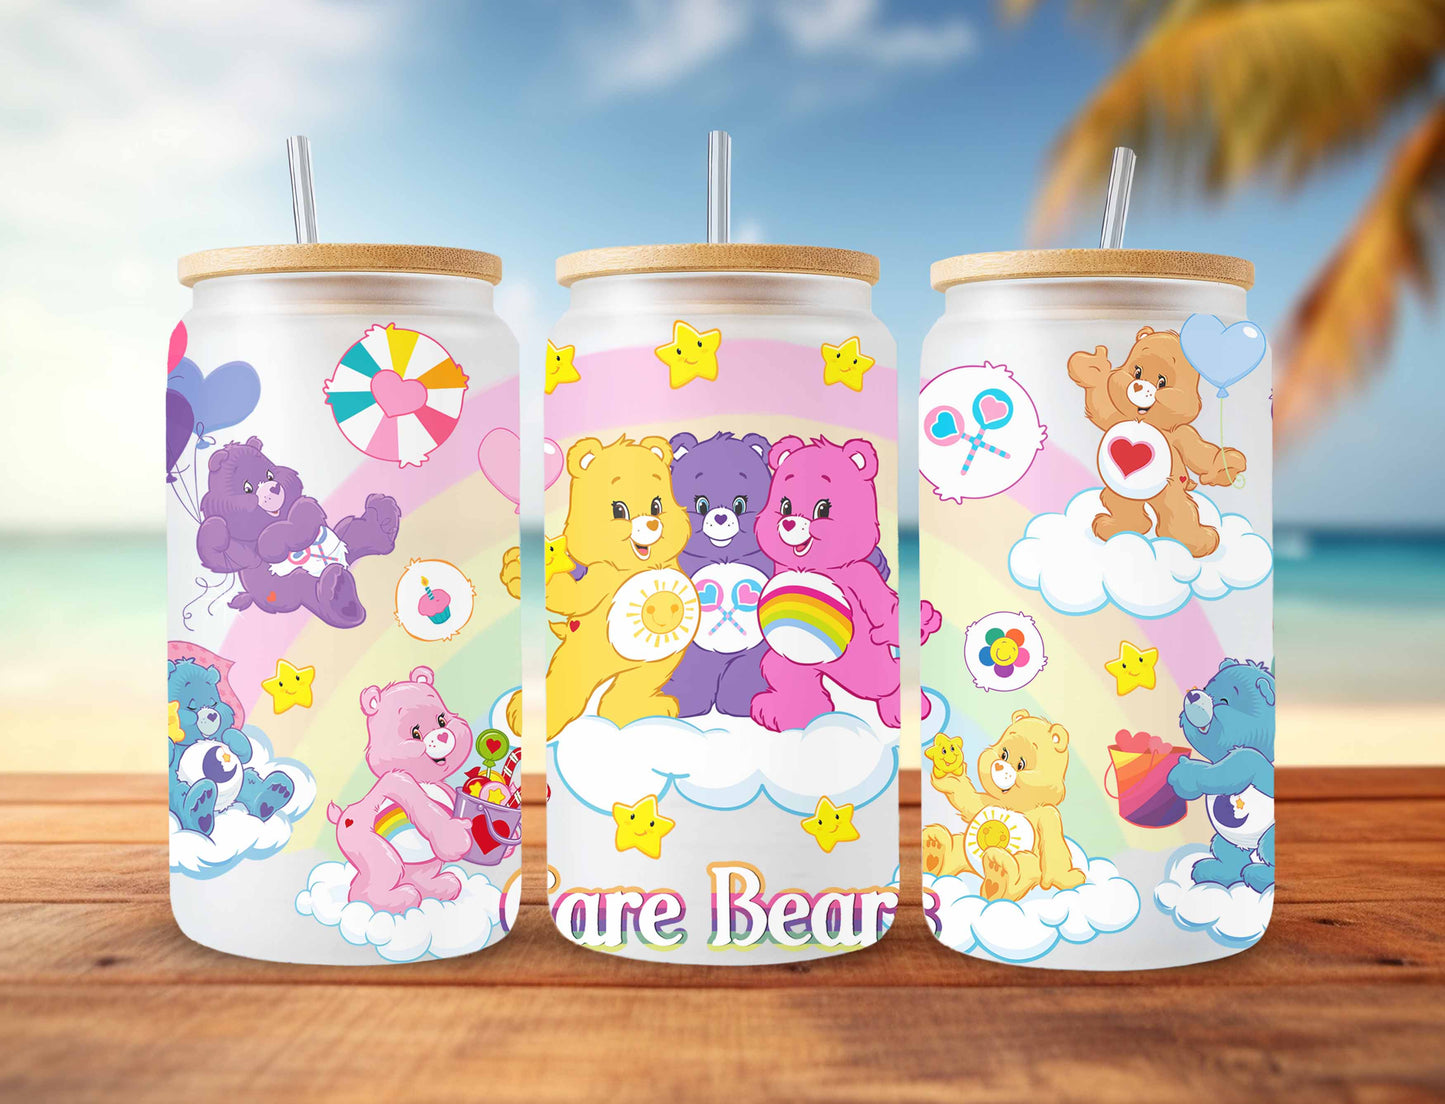 Bears Cartoons 16oz Wrap, 16oz Libbey Glass Can, Frosted Can Glass, Sublimation Design, Rainbow Design, Cute Bears Wrap,Cute Cartoon Design